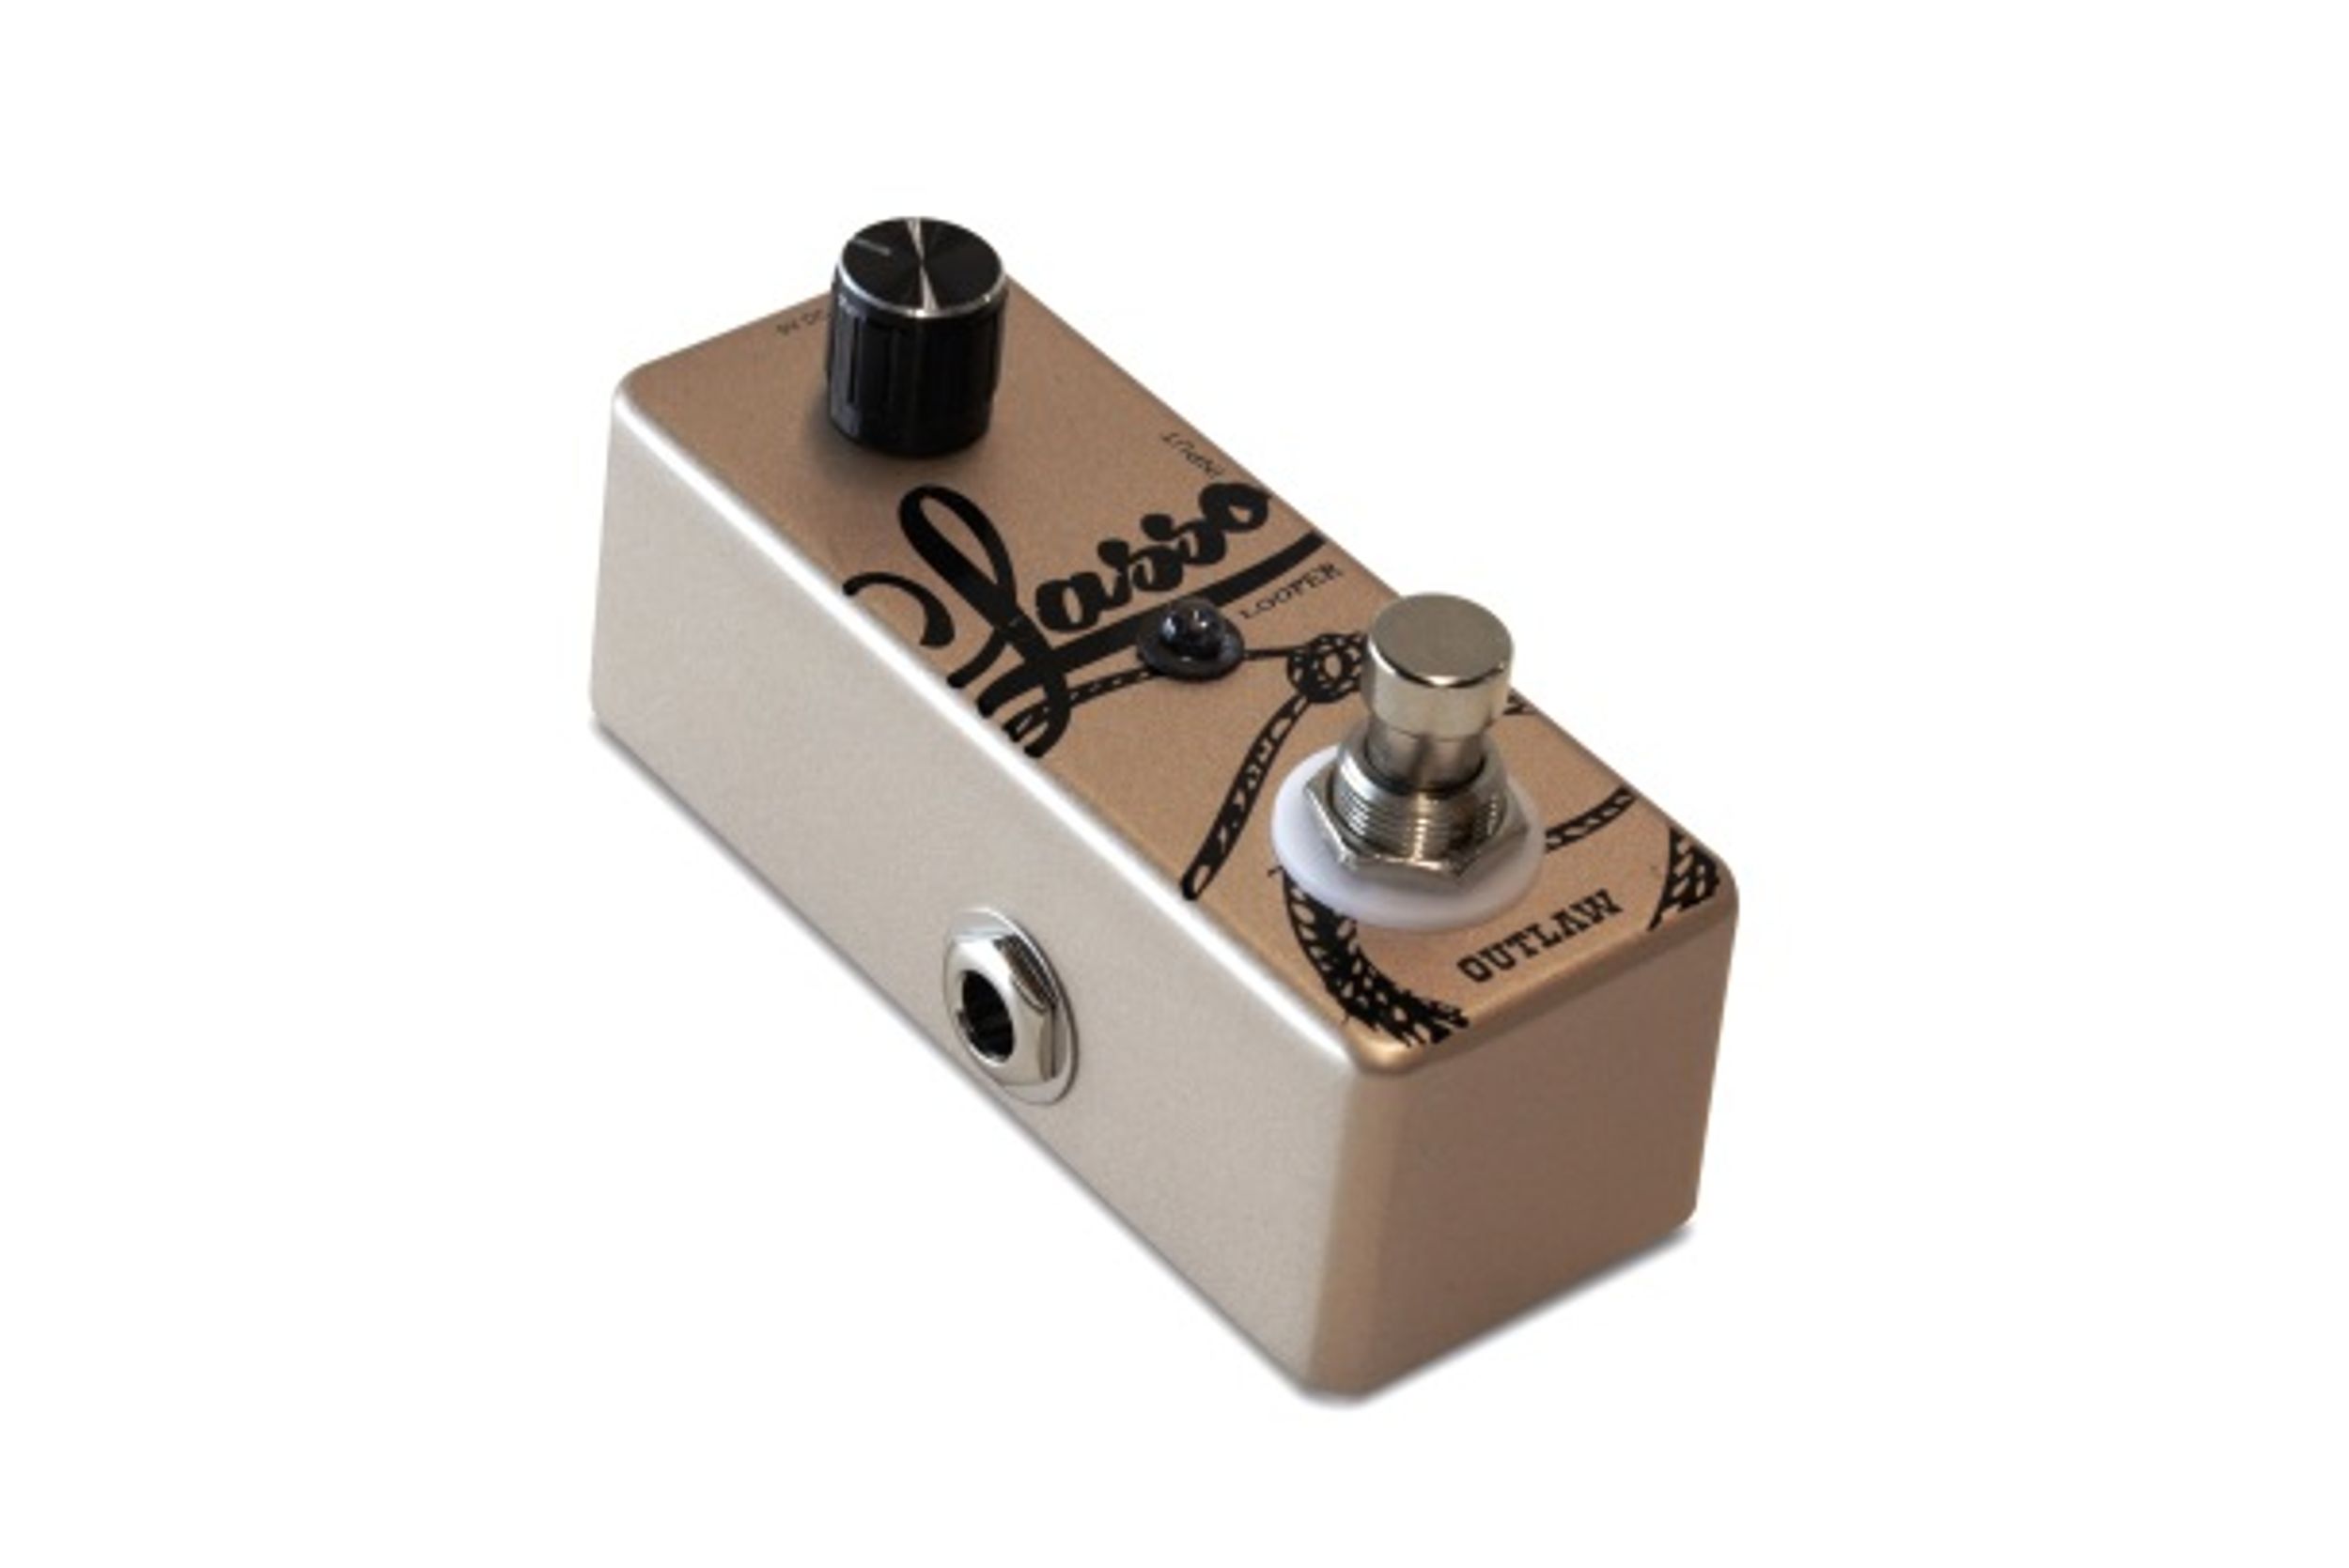 Outlaw Effects Introduces the Lasso Looper, Six Shooter II Tuner, and Kerosene and Iron Horse Power Supplies